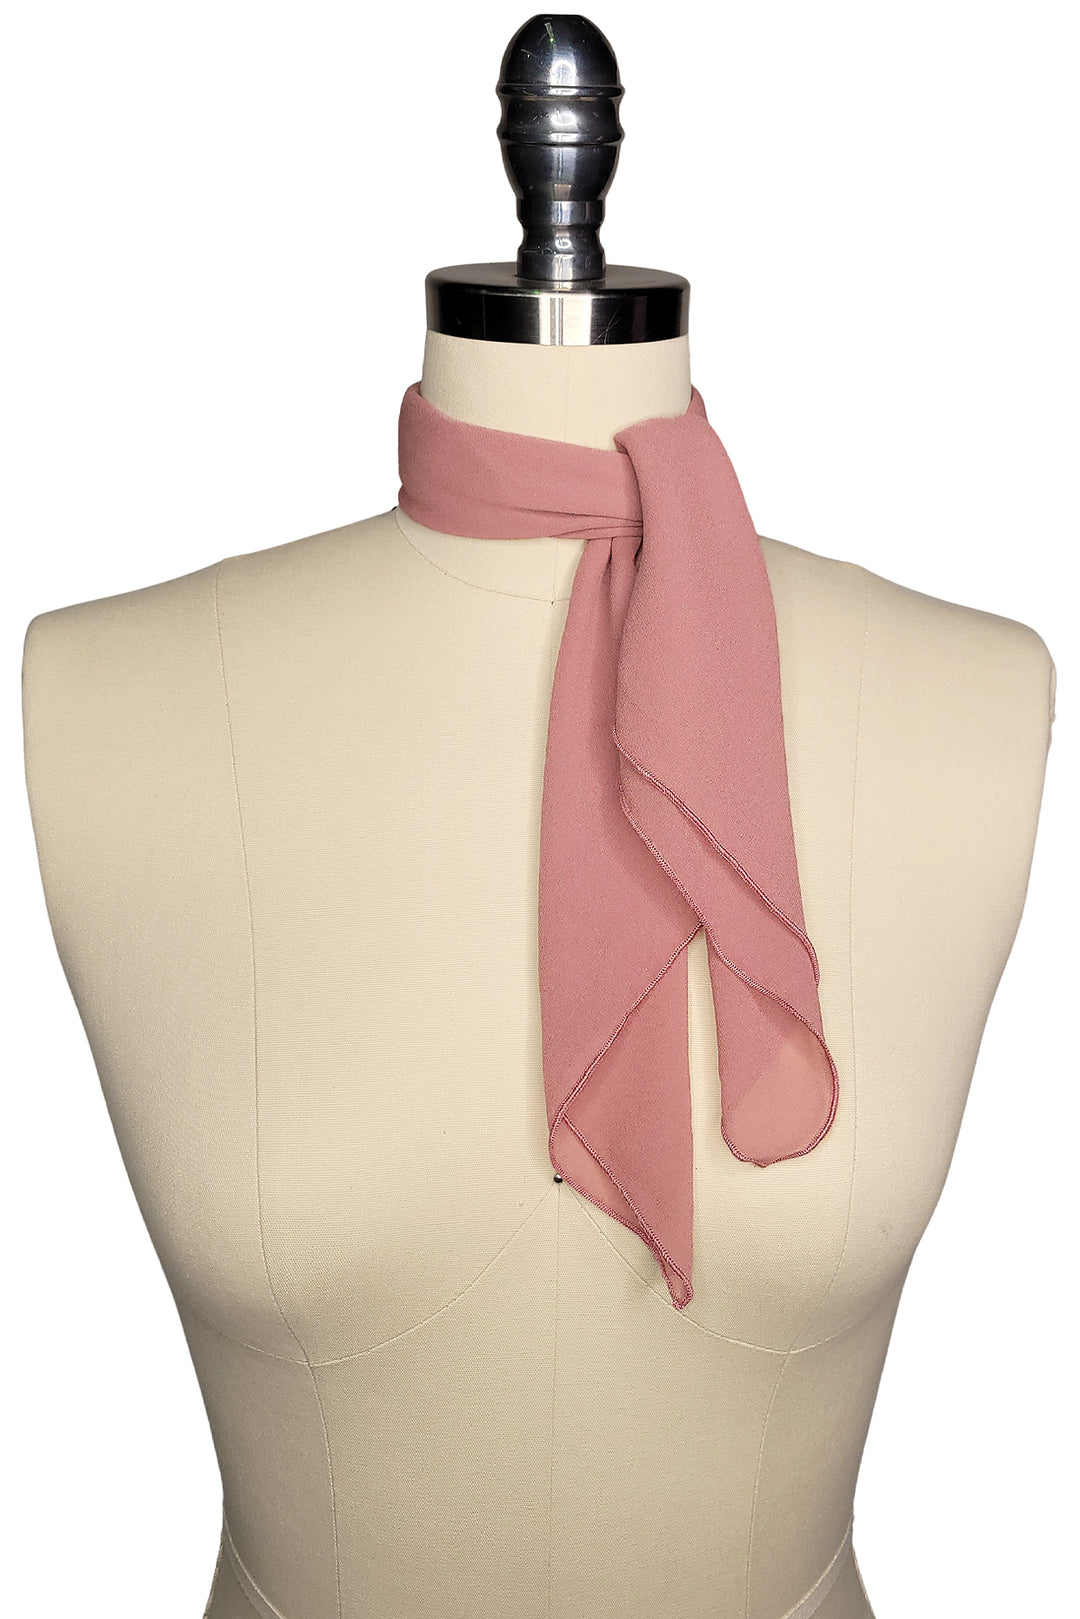 Verona Square Neck Scarf (Pink) - Kitten D'Amour